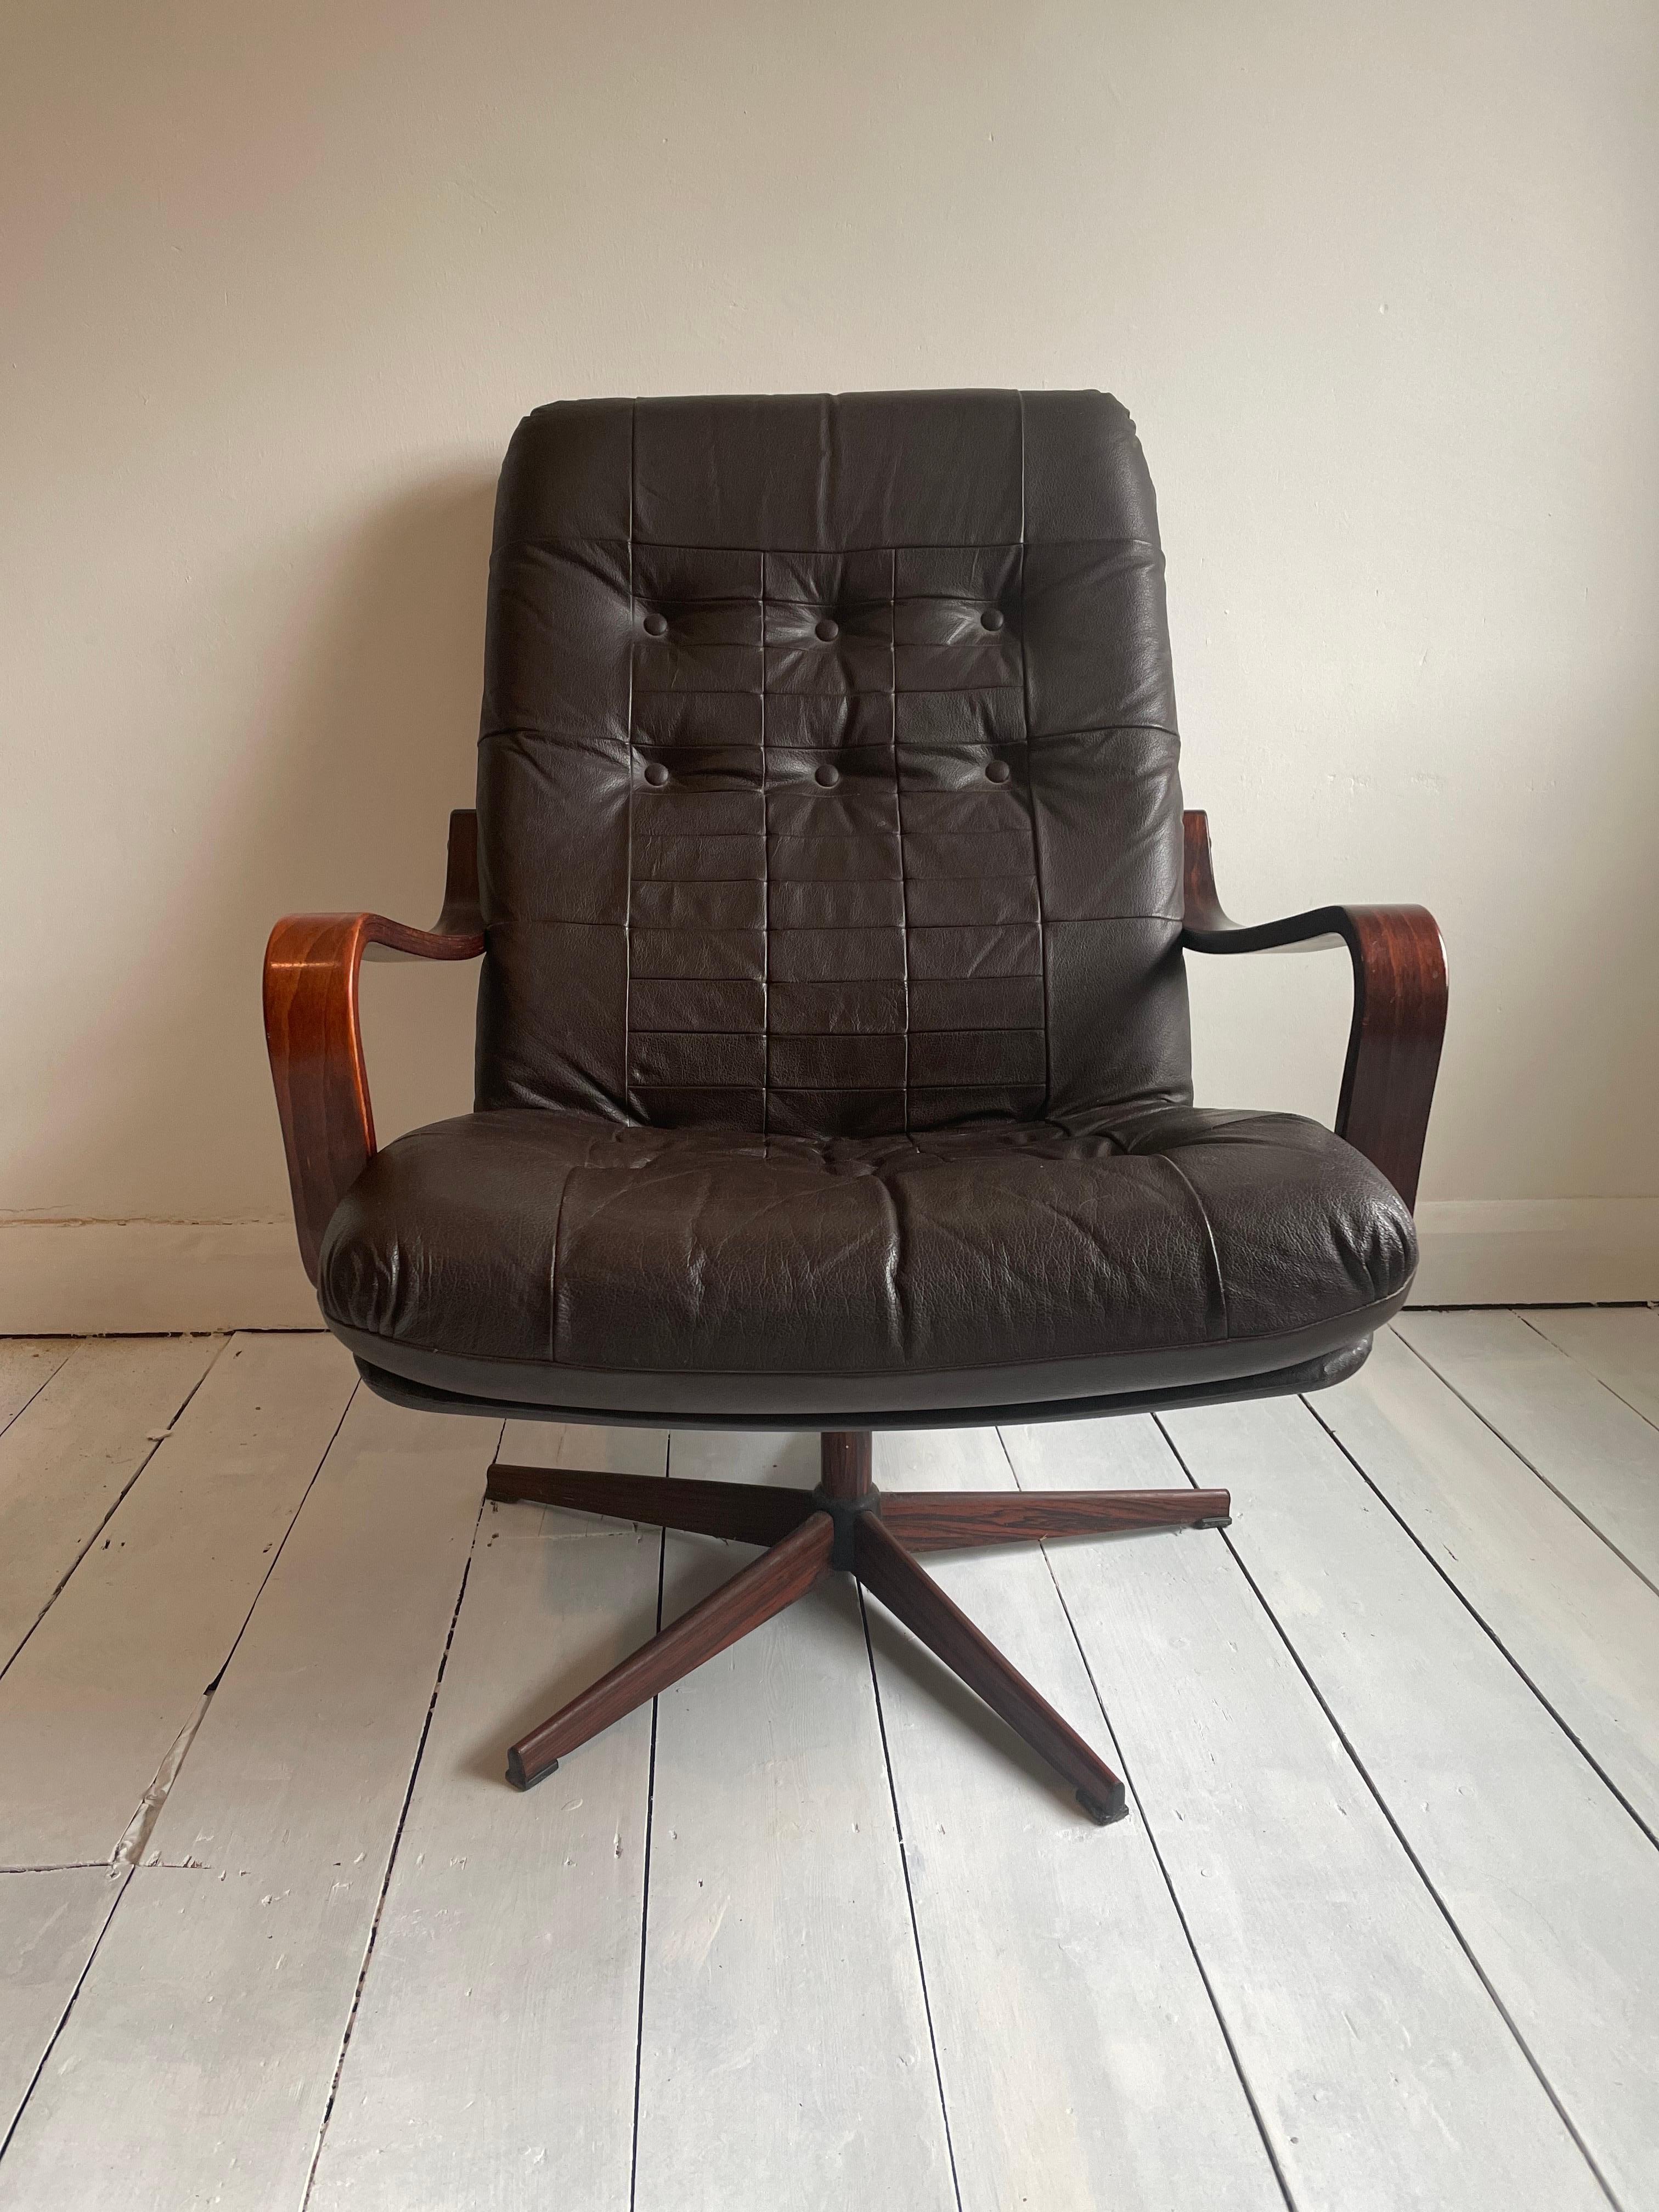 1970s, Scandinavian design. Swivel chair five-star base. Dark brown. Original very good condition:  Manufactured by Swedish or Danish furniture manufacturer in about 1970s. This handsome swivel chair  is in superb vintage condition and good to go